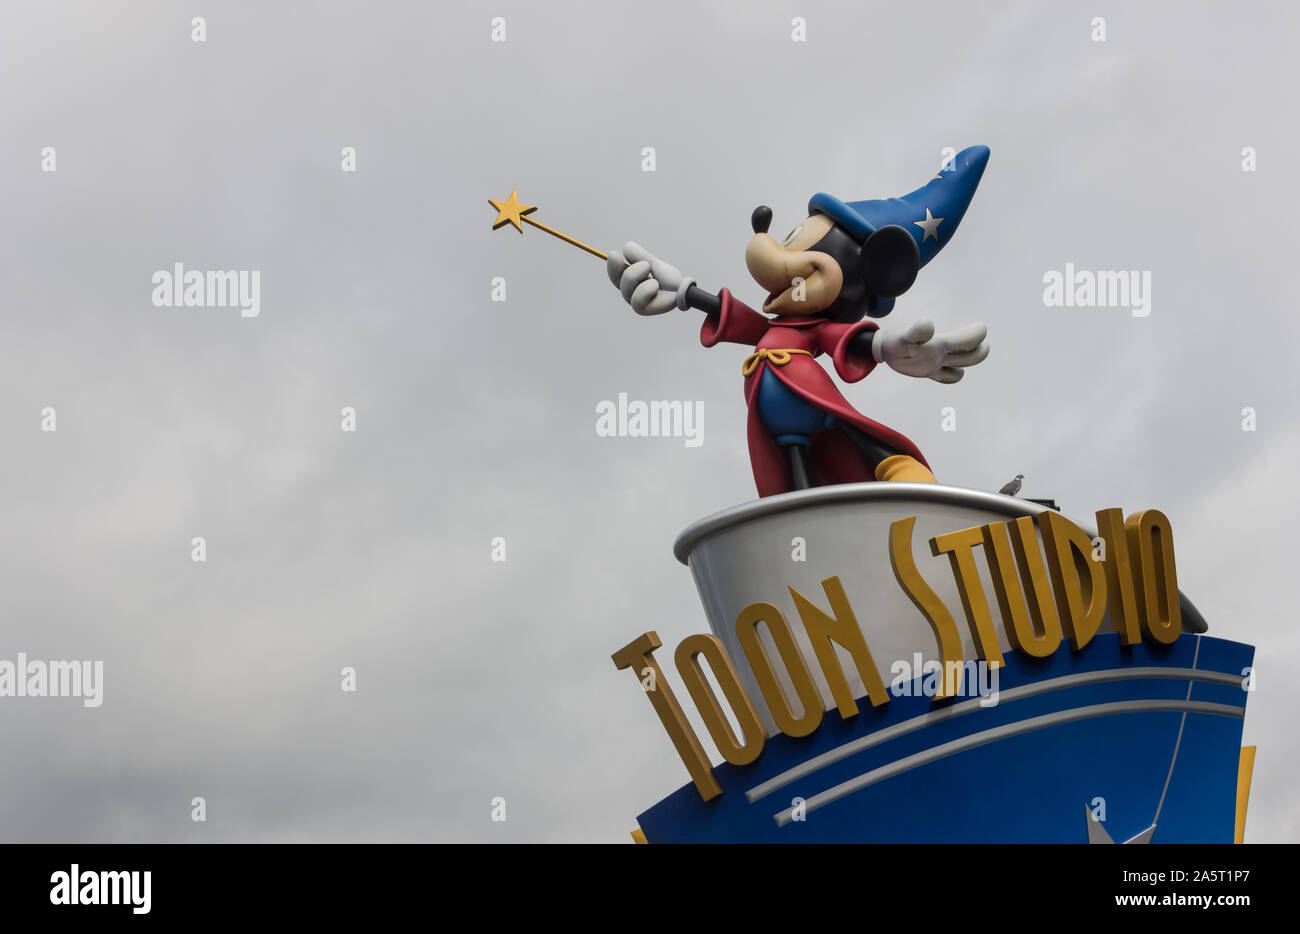 A picture of a statue of Mickey Mouse, as a Sorcerer, at the top of a Toon Studio sign, in Disneyland Paris. Stock Photo